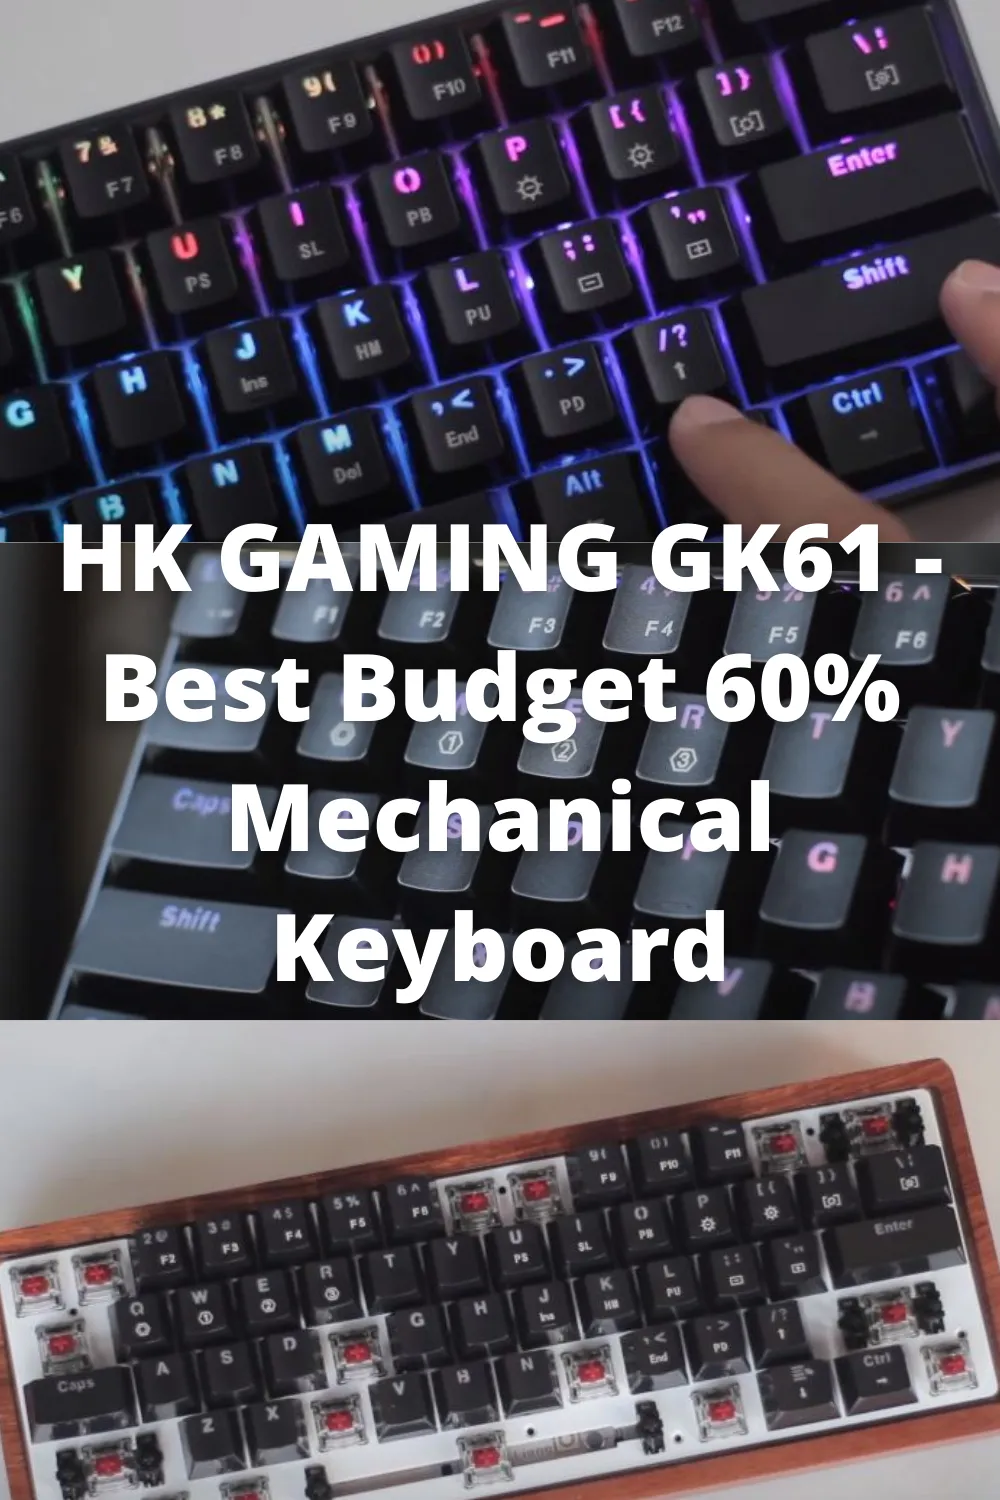 HK GAMING GK61 Mechanical Keyboard should be a very decent choice for you to consider. HK GAMING GK61 has a 60% layout size with double shot ABS keycaps which are of fairly good quality. This is the most affordable 60% mechanical keyboard available today. Is HK Gaming GK61 worth it for you?